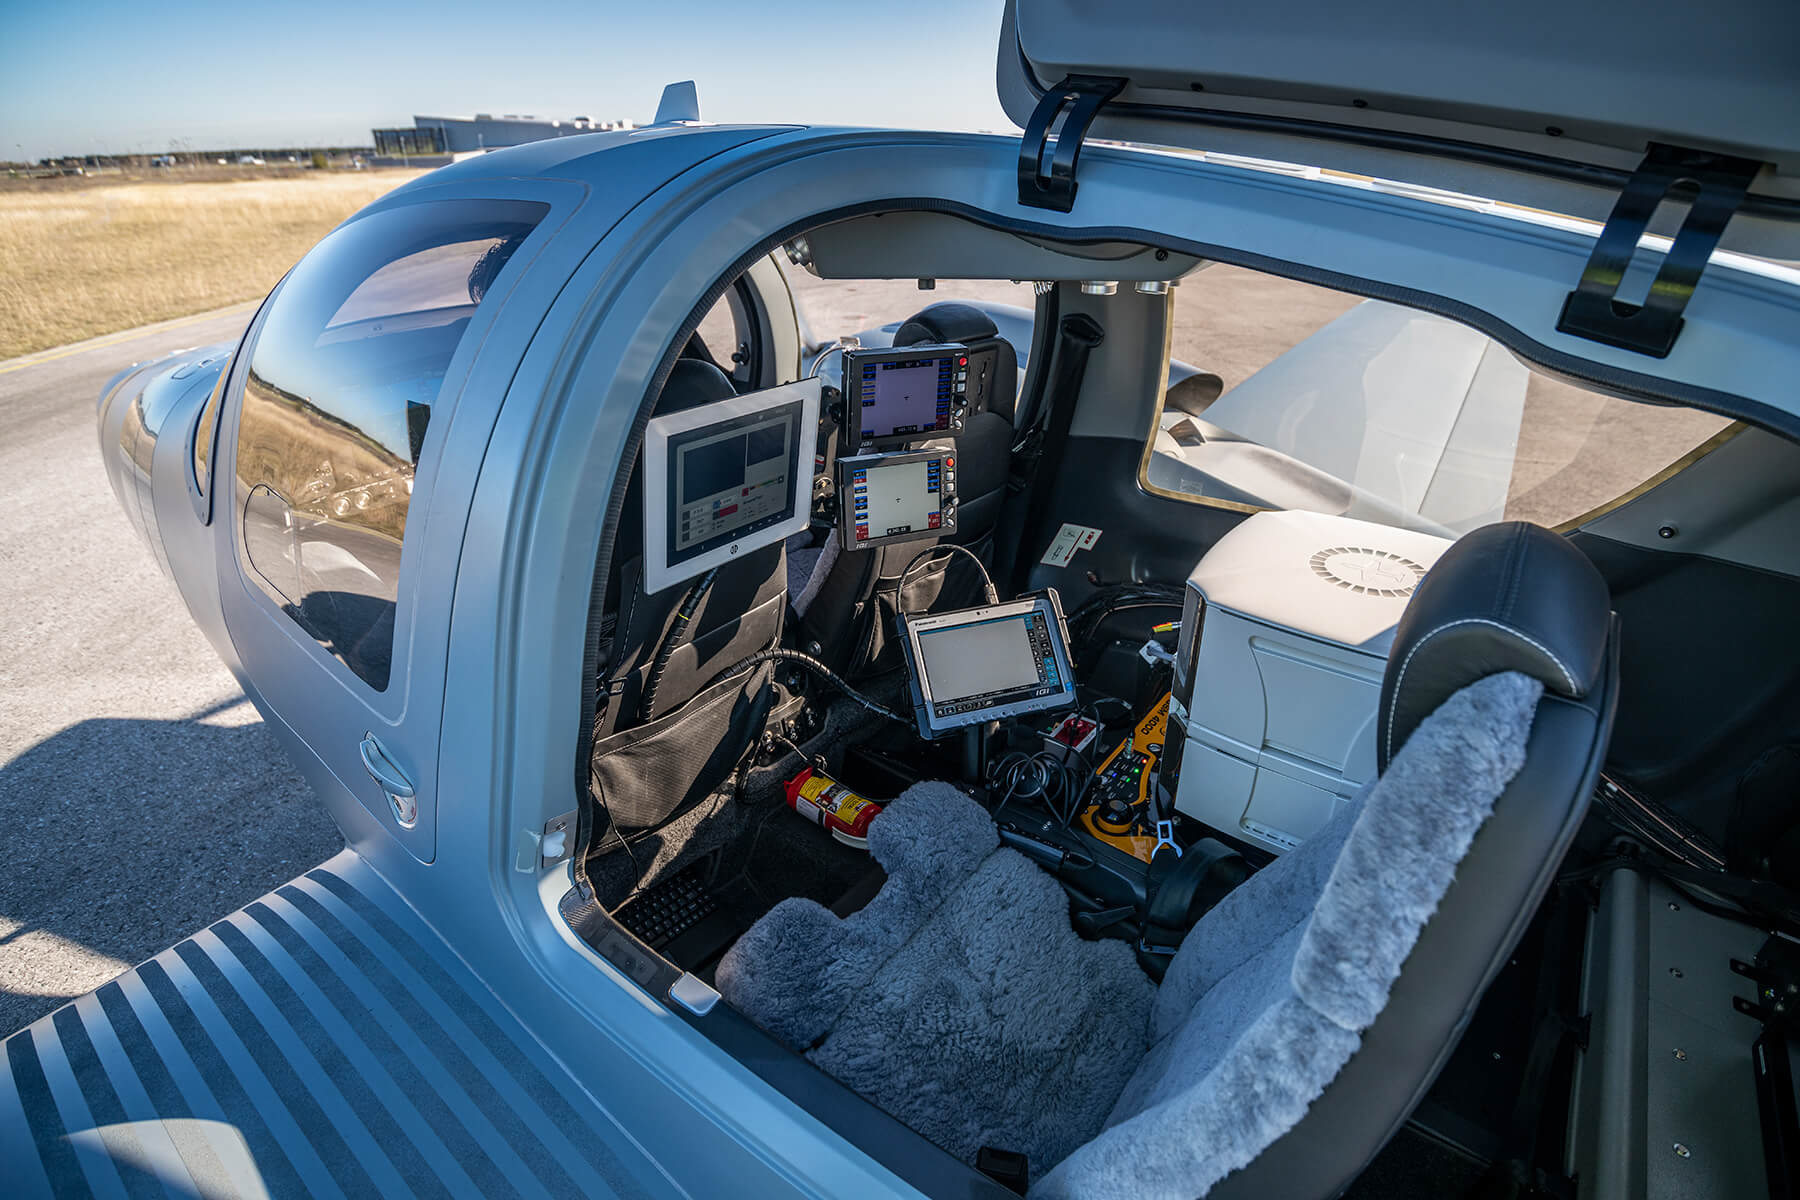 View into the DA62 MPP SurveyStar cabin with GSM 4000 gimbal, UltraCam aerial camera and related equipment